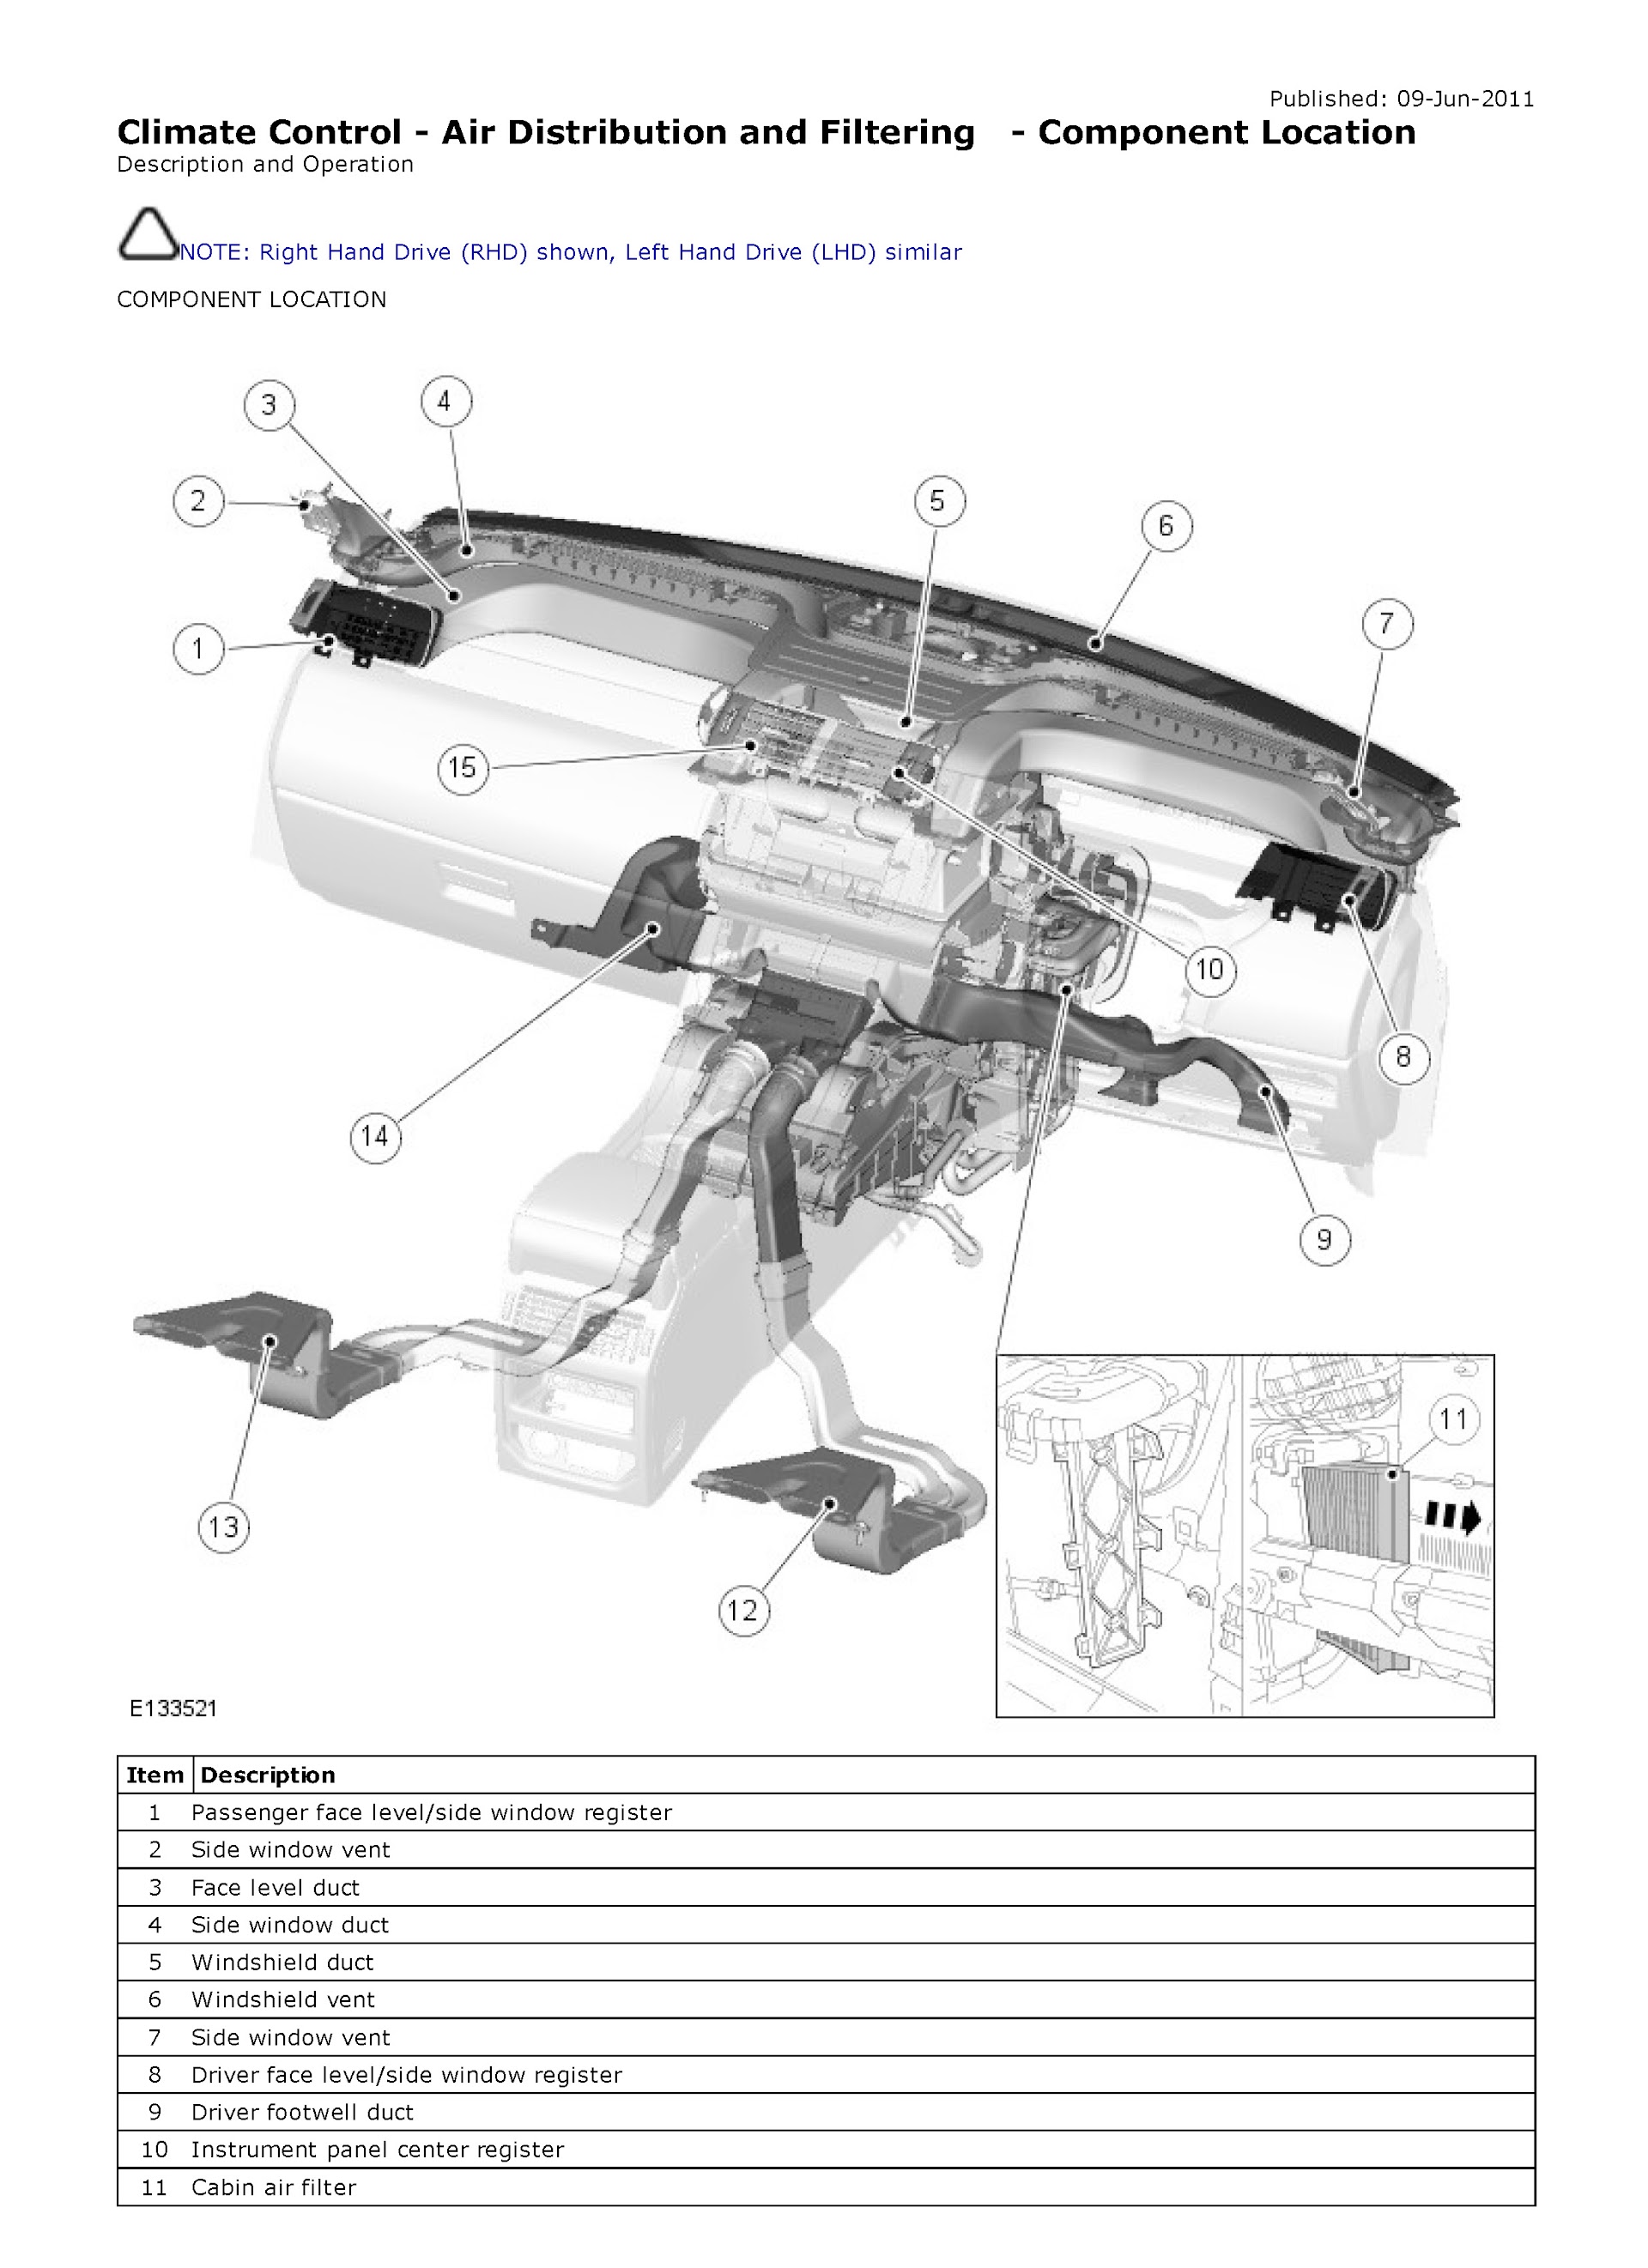 2012 Range Rover Evoque Repair Manual. Air Distribution and Filtering